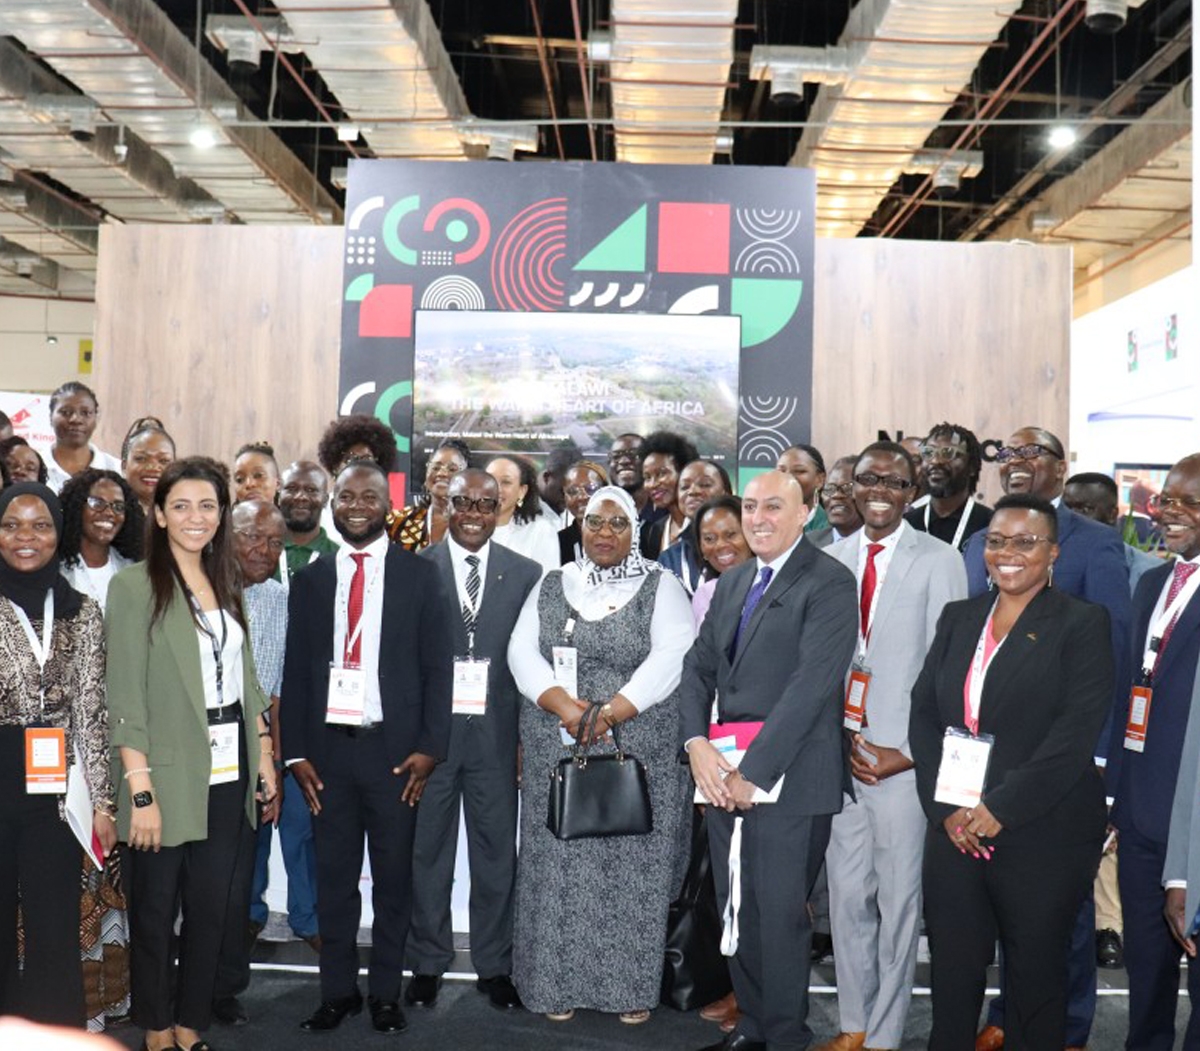 The Malawi delegation at IATF 2023 led by Minister of Trade and Industry Hon. Sosten Gwengwe, MP.